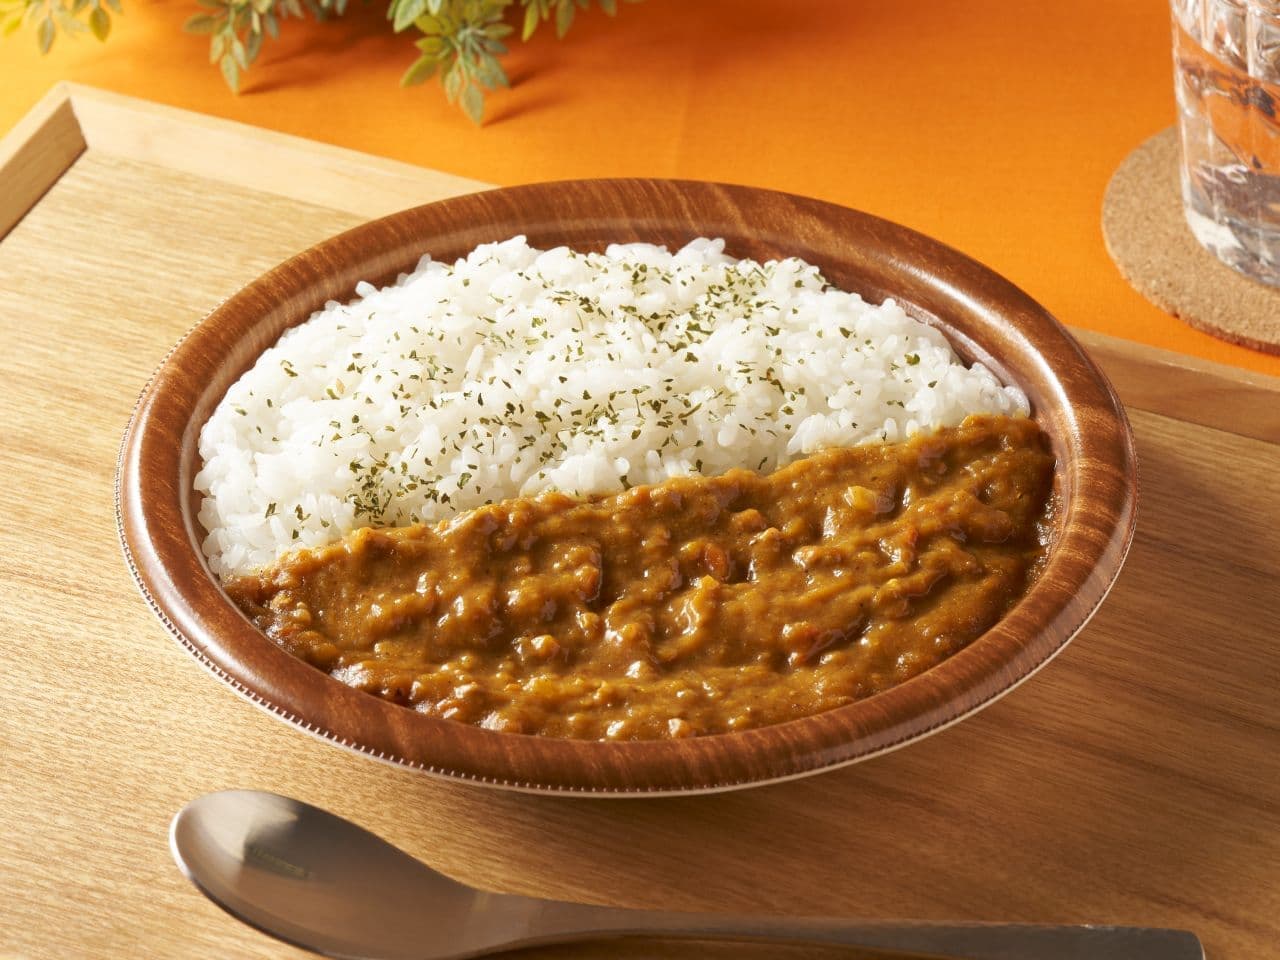 Ministop "Sapporo Grand Hotel supervised Keema Curry".